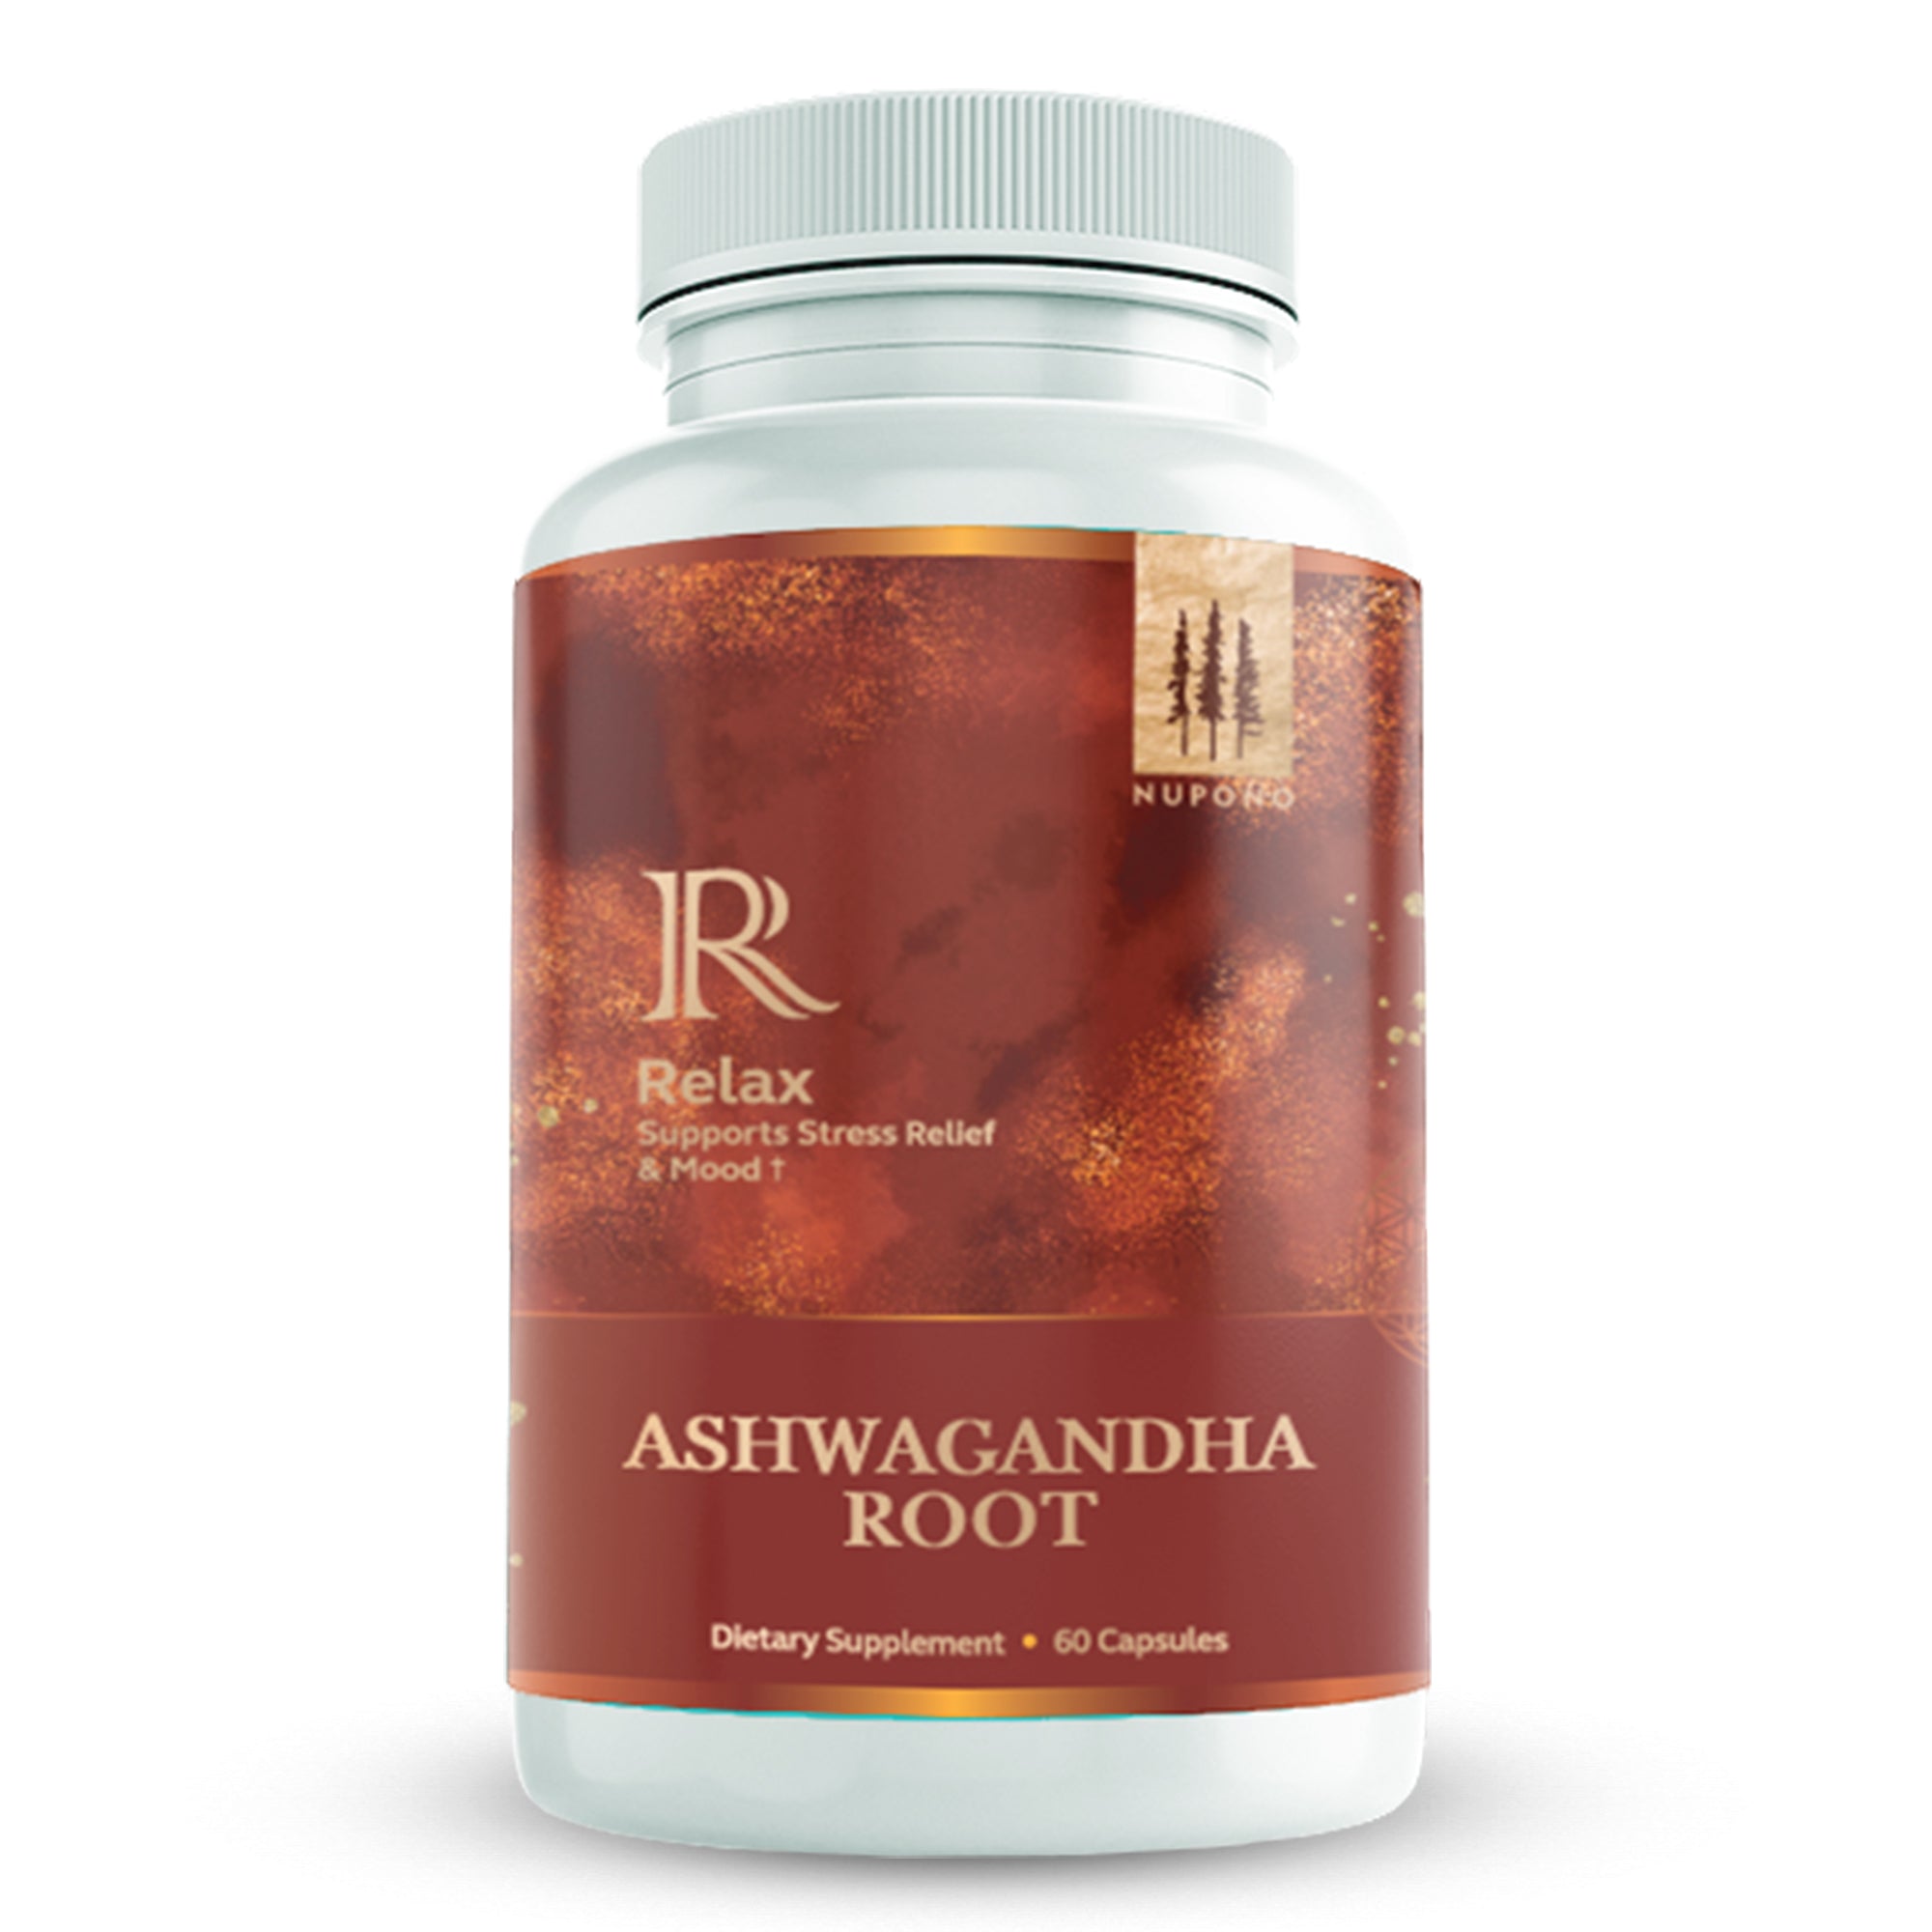 Ashwagandha Root Supplement 675mg with Black Pepper for Better Absorption 60 Tablets - Reduce Stress Ease Anxiety and Elevate Mood, Energy